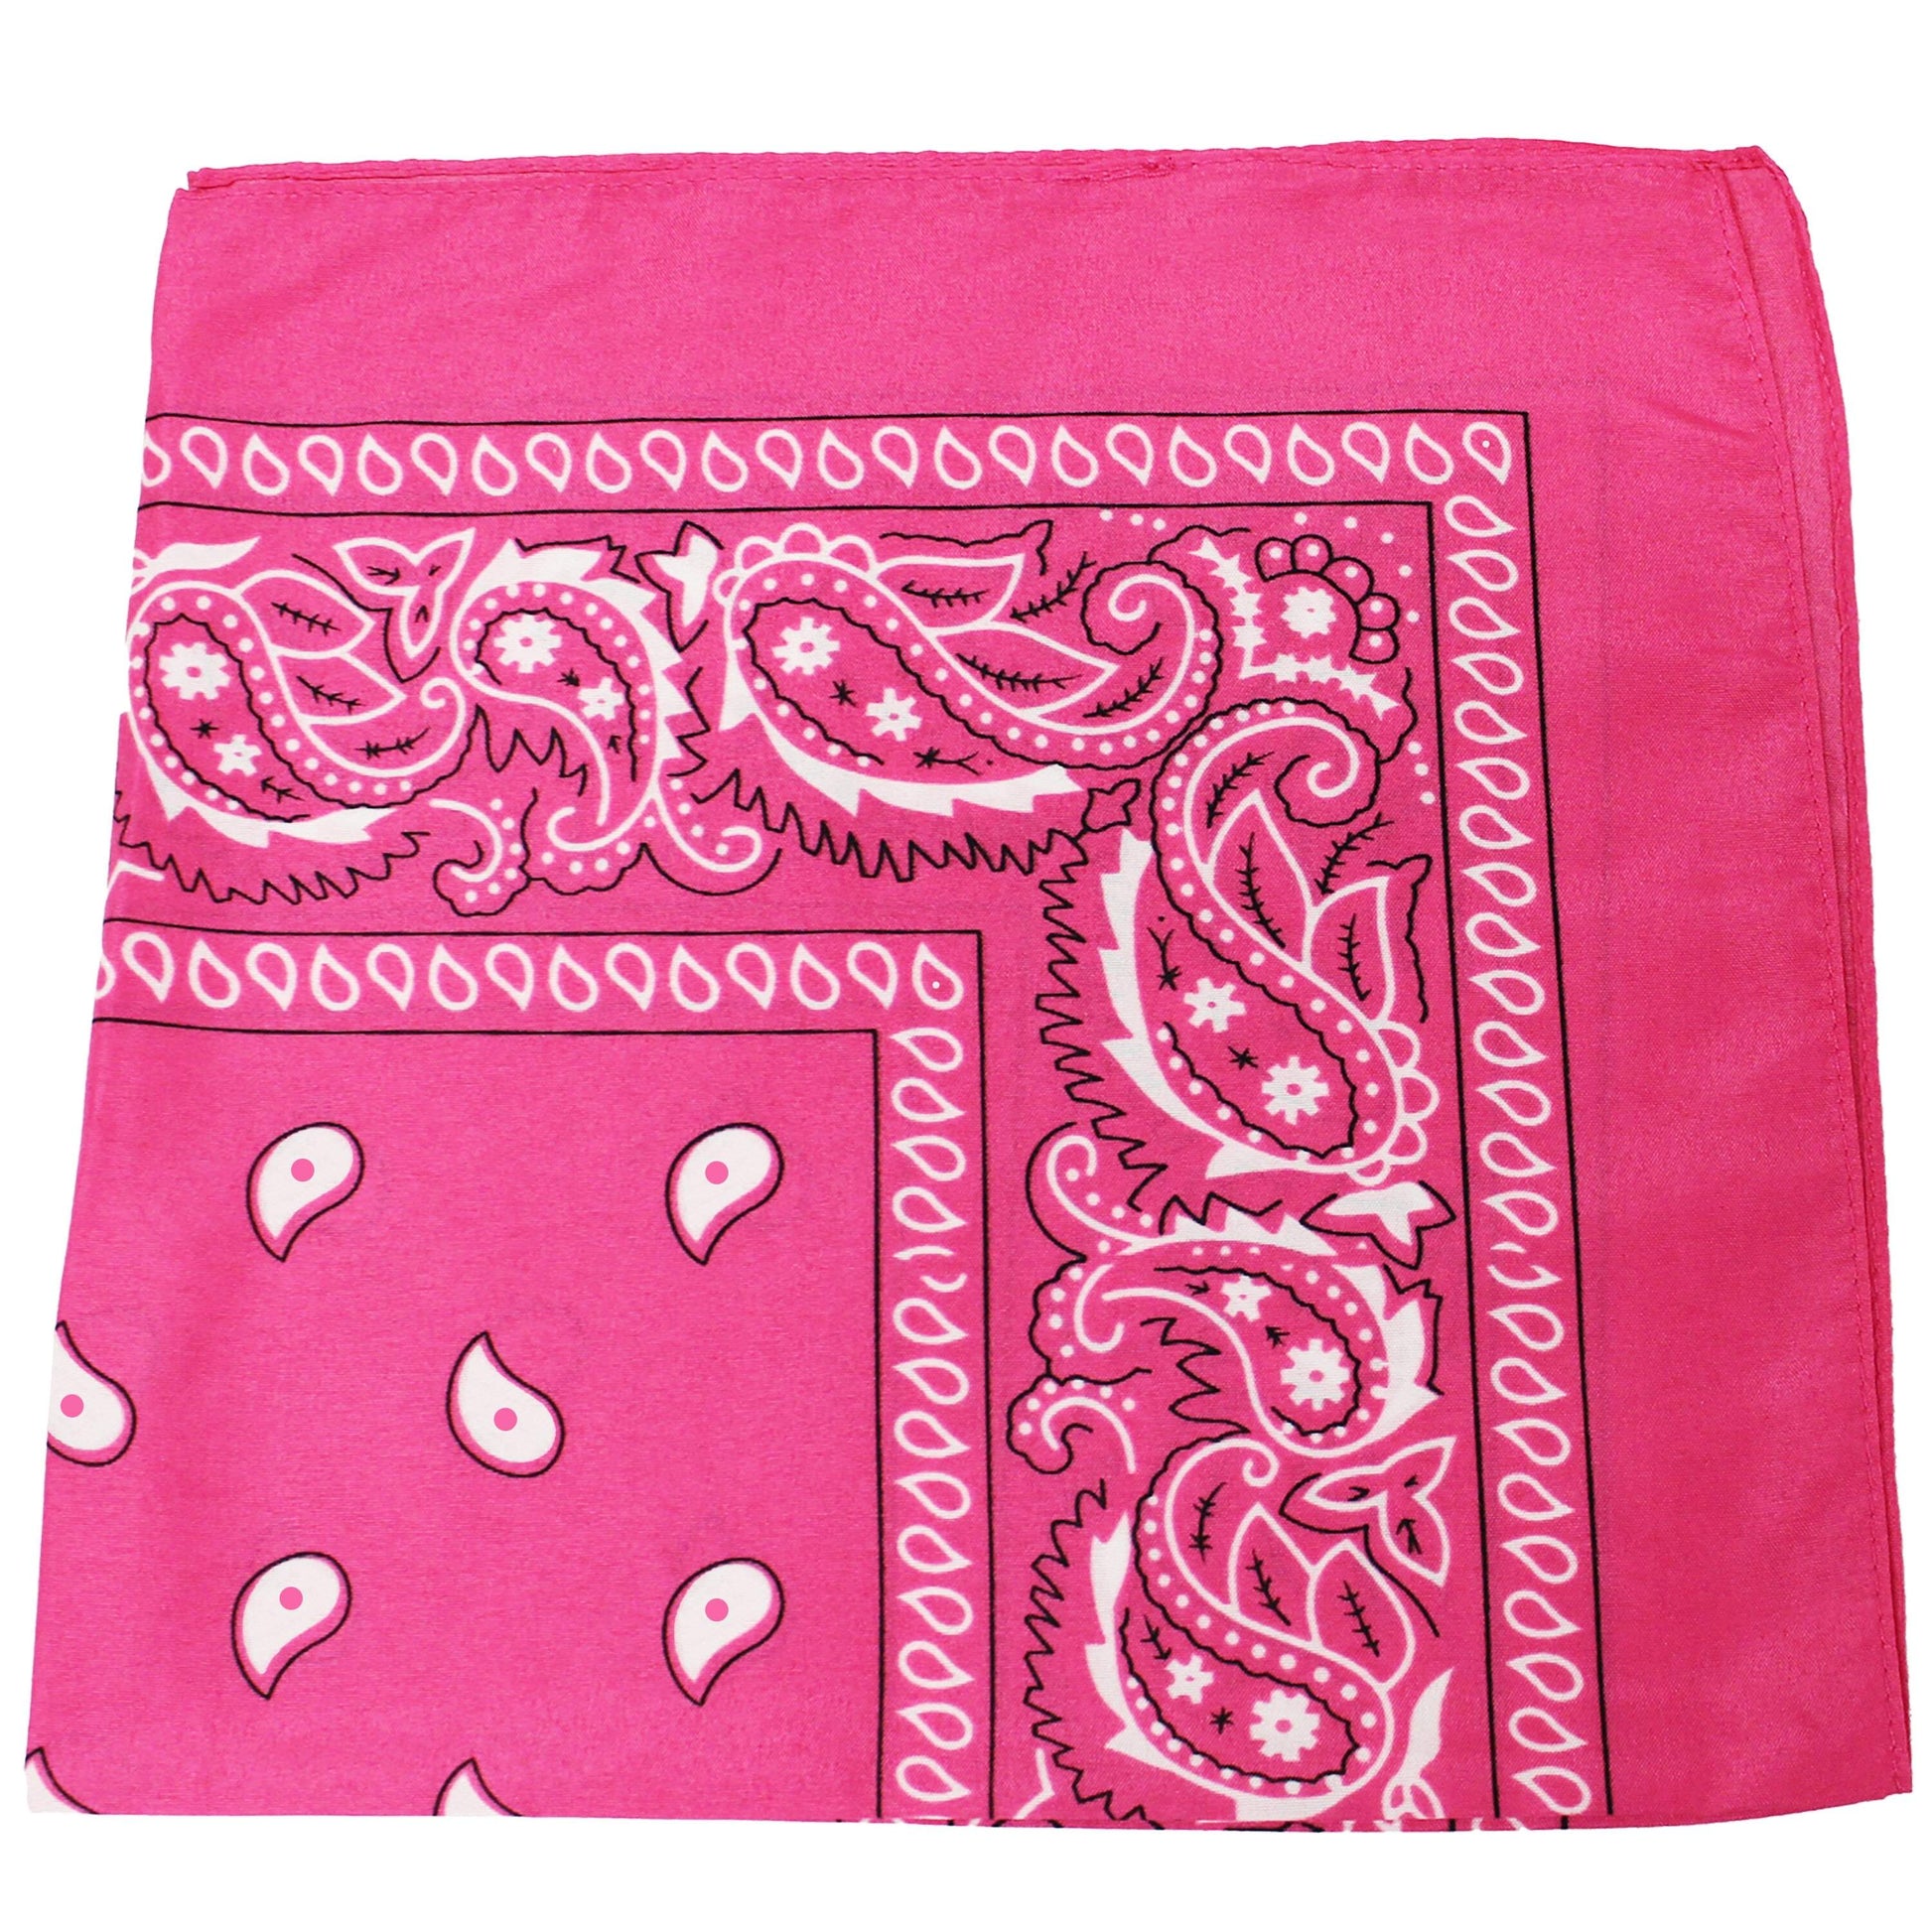 2 Pack Mechaly Cotton 22 x 22 In Bandana - Paisley and Solid Colors Available